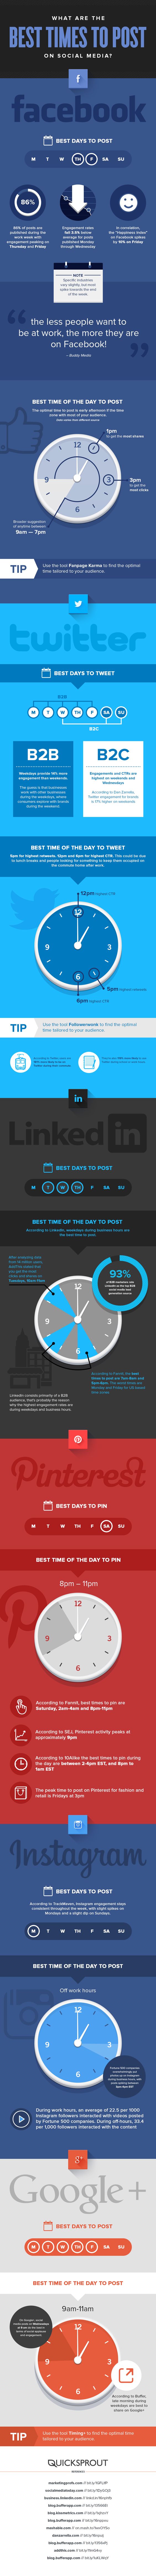 Great infographic showing the best times to post on social media in 2015